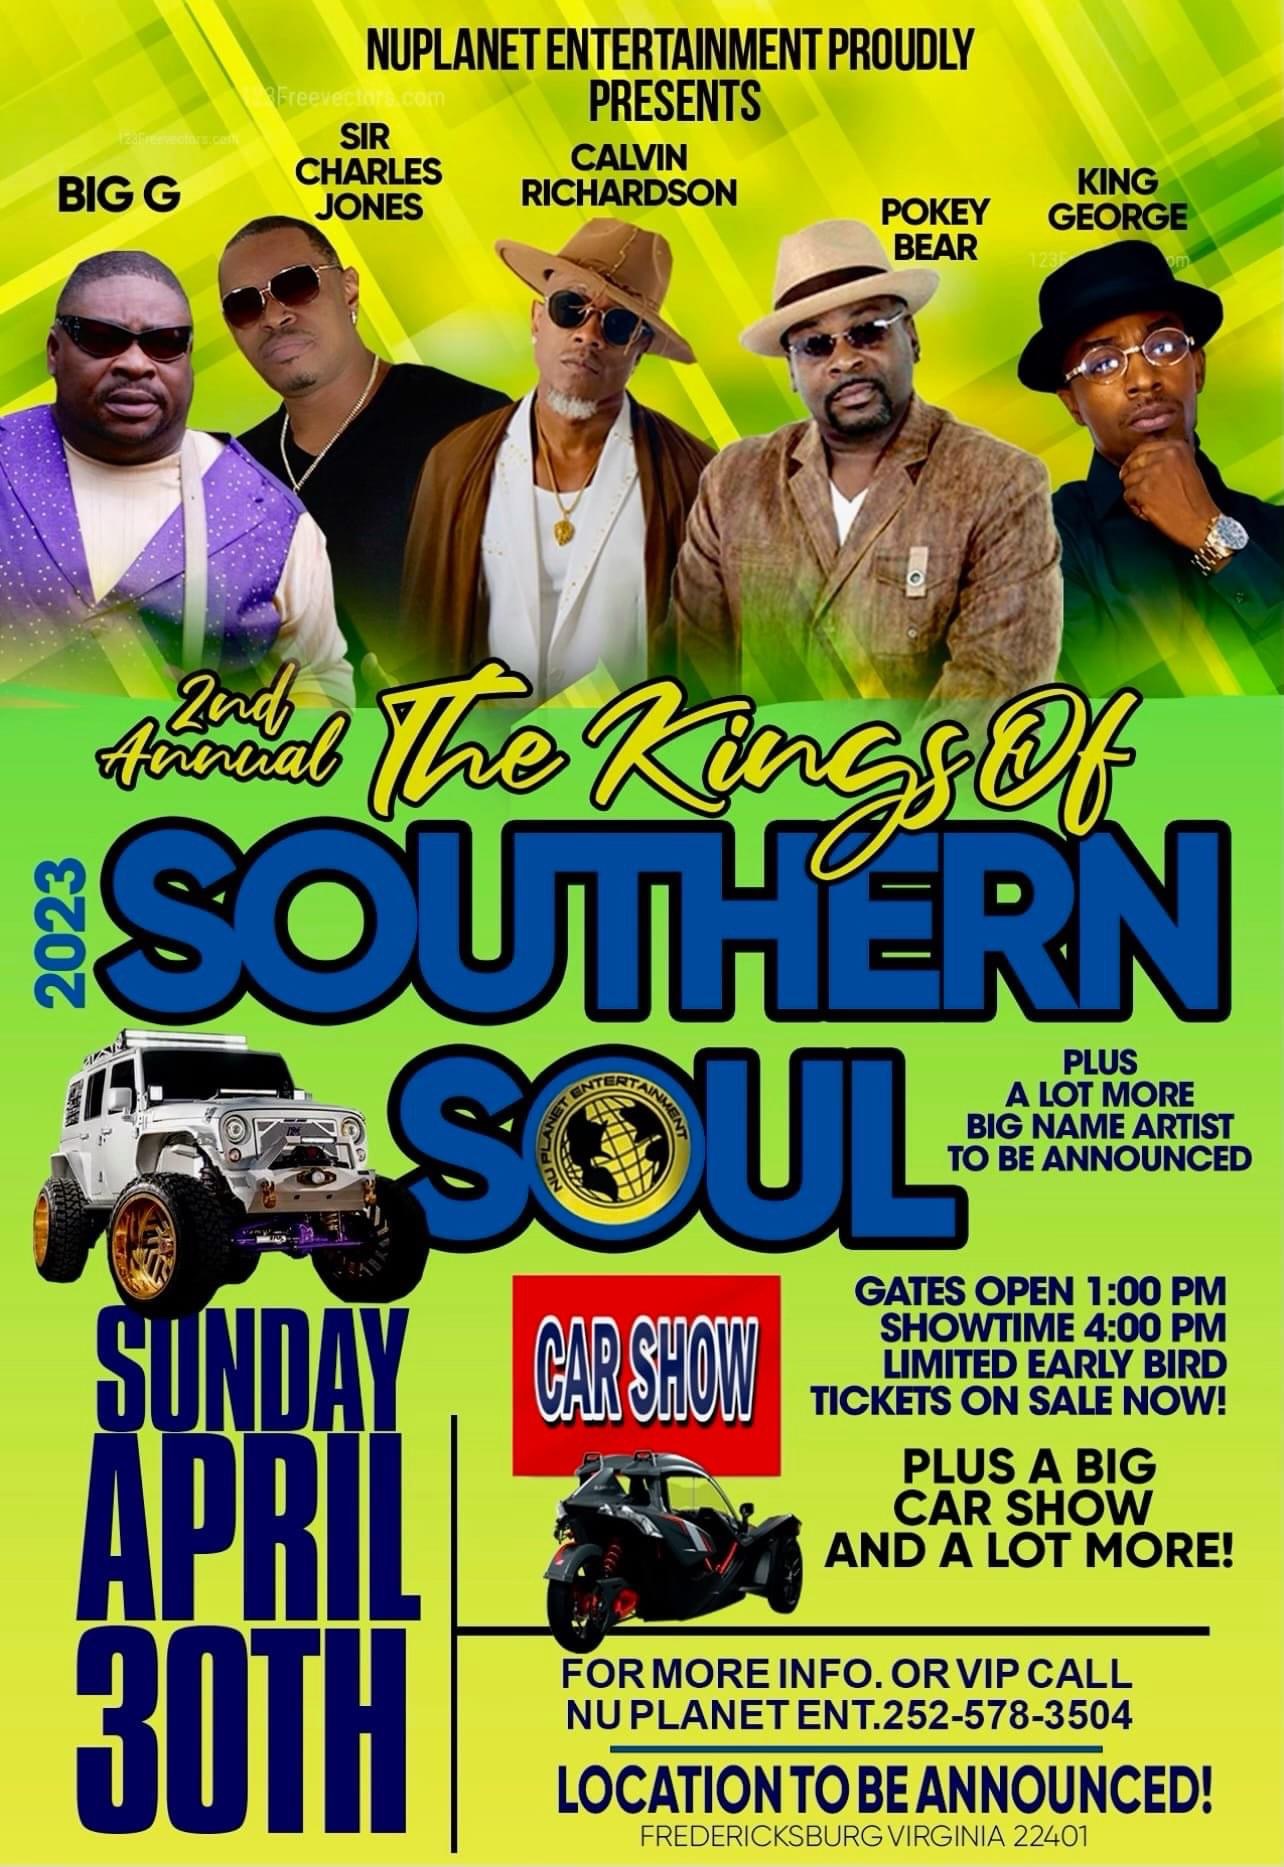 2ND ANNUAL THE KINGS OF SOUTHERN SOUL Ace Visionz Productions